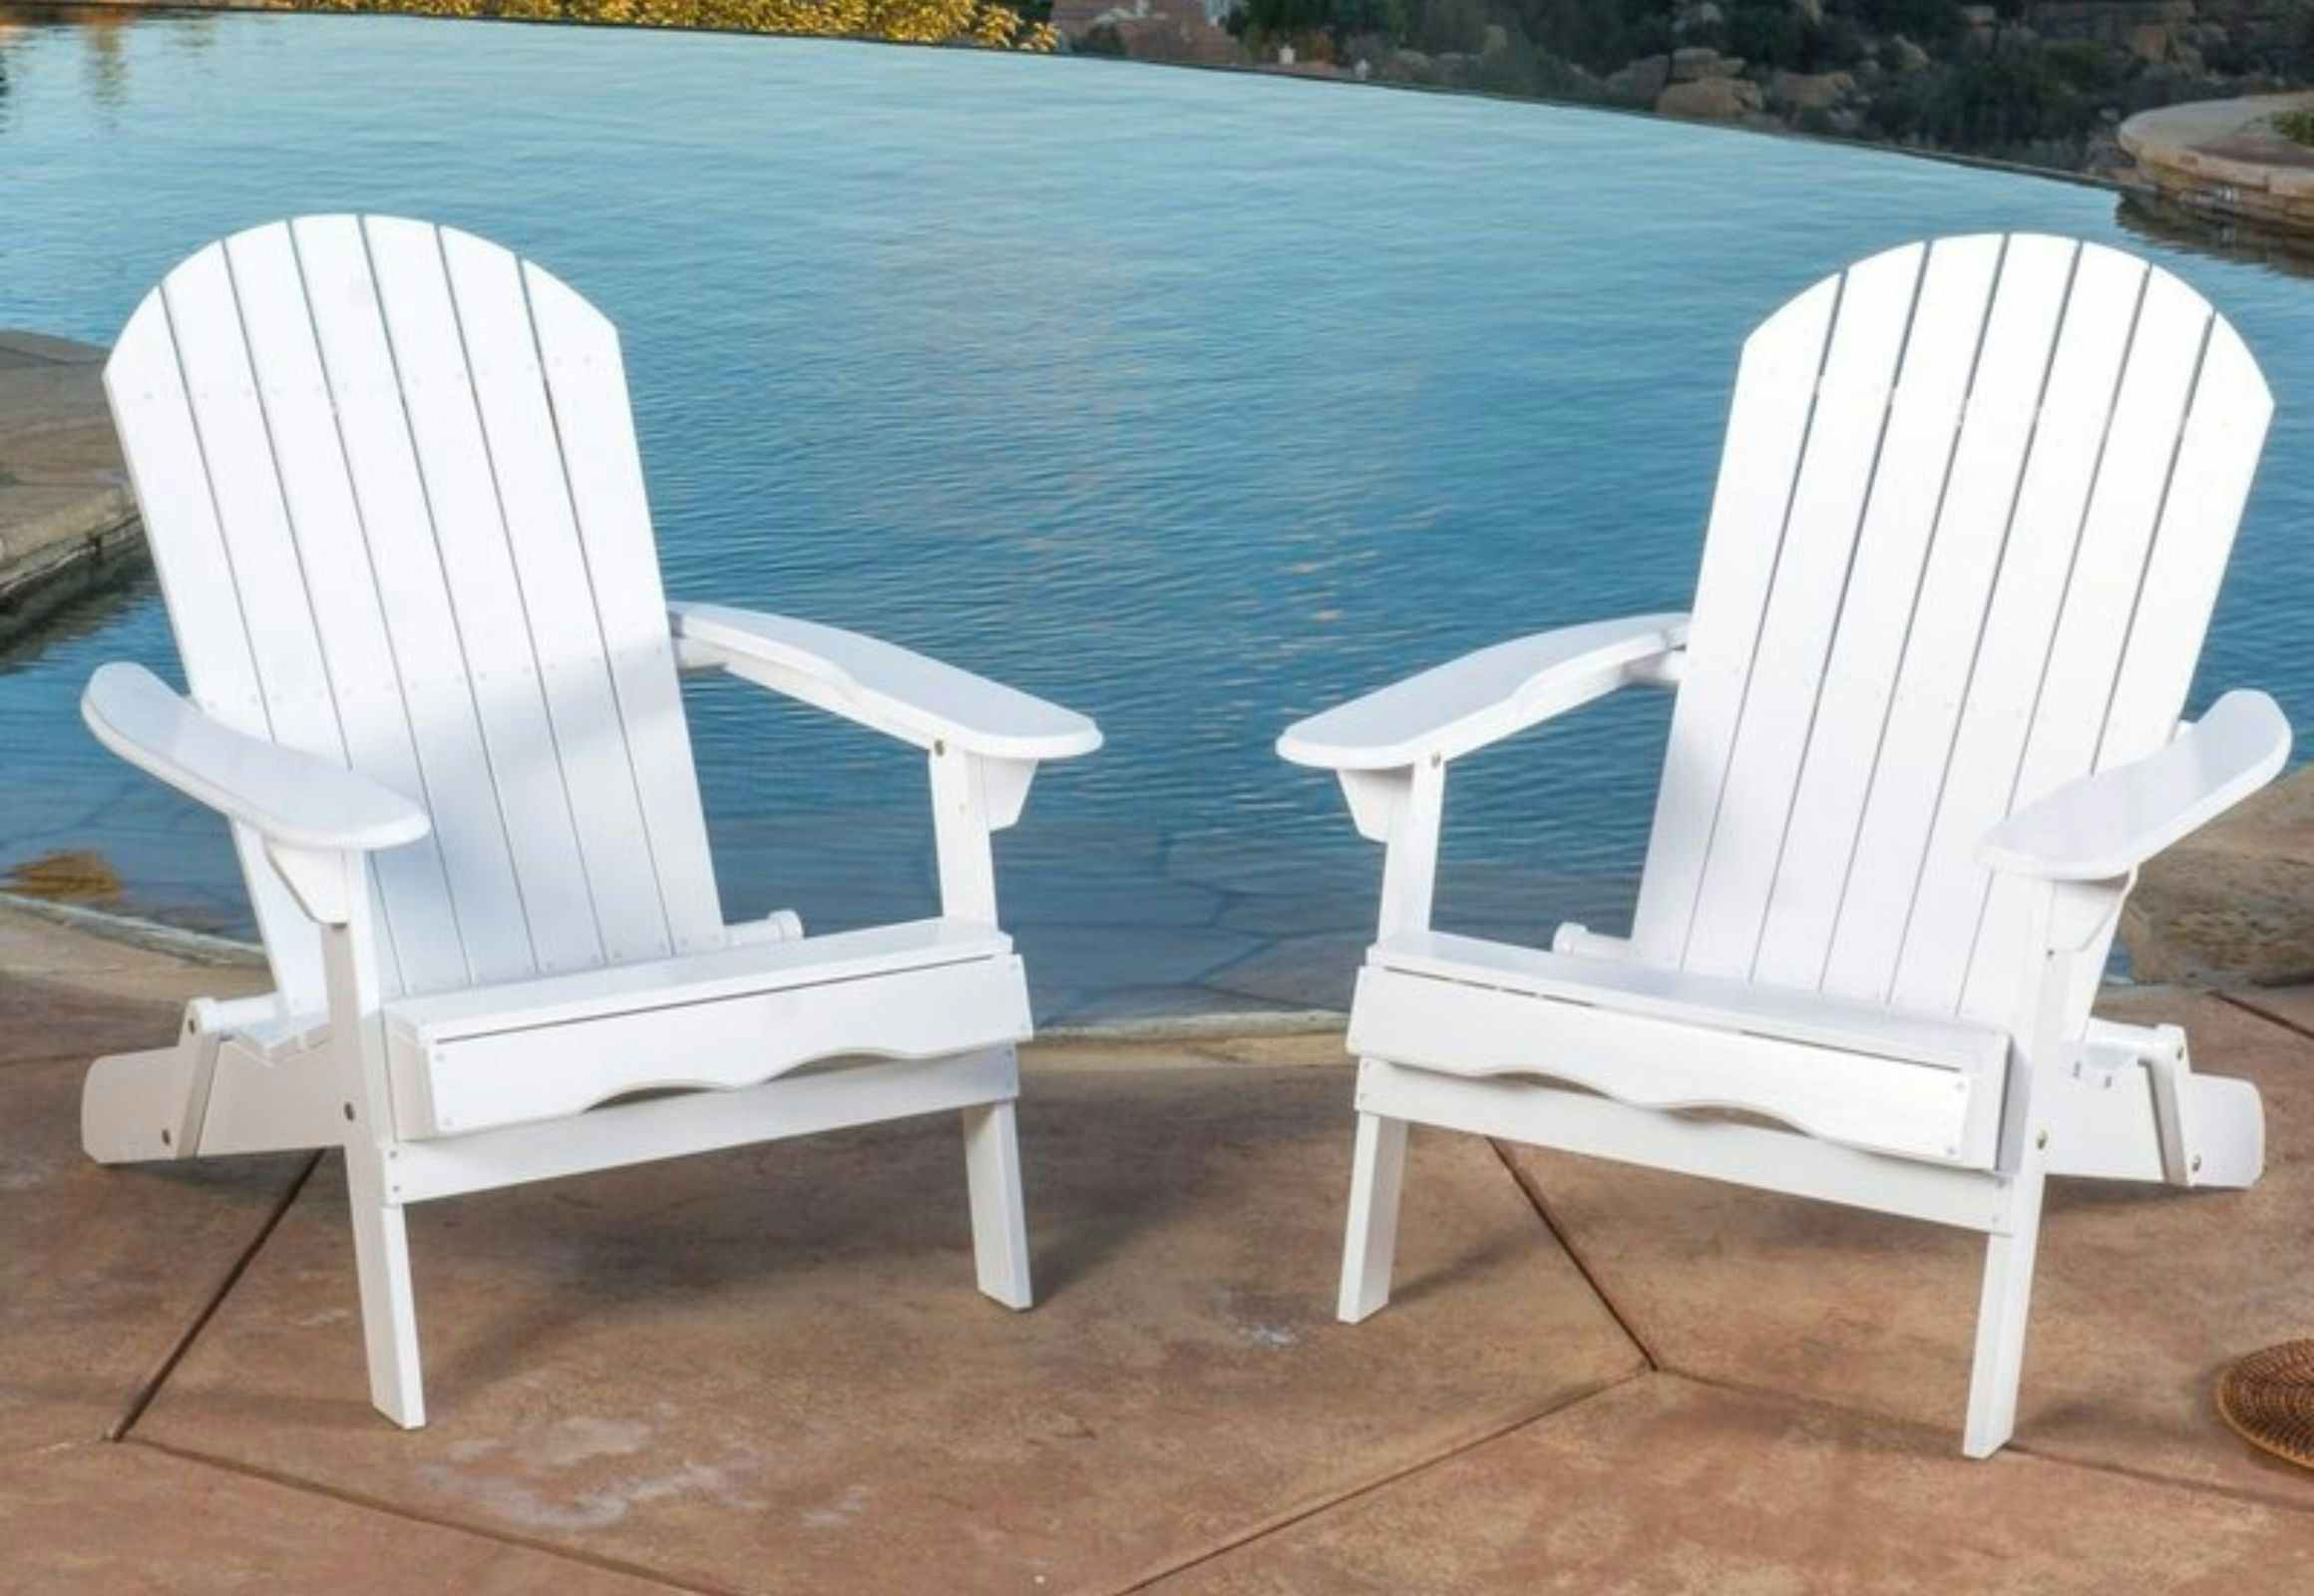 Set of 2 Adirondack Chairs, as Low as $127 at Wayfair — Will Sell Out